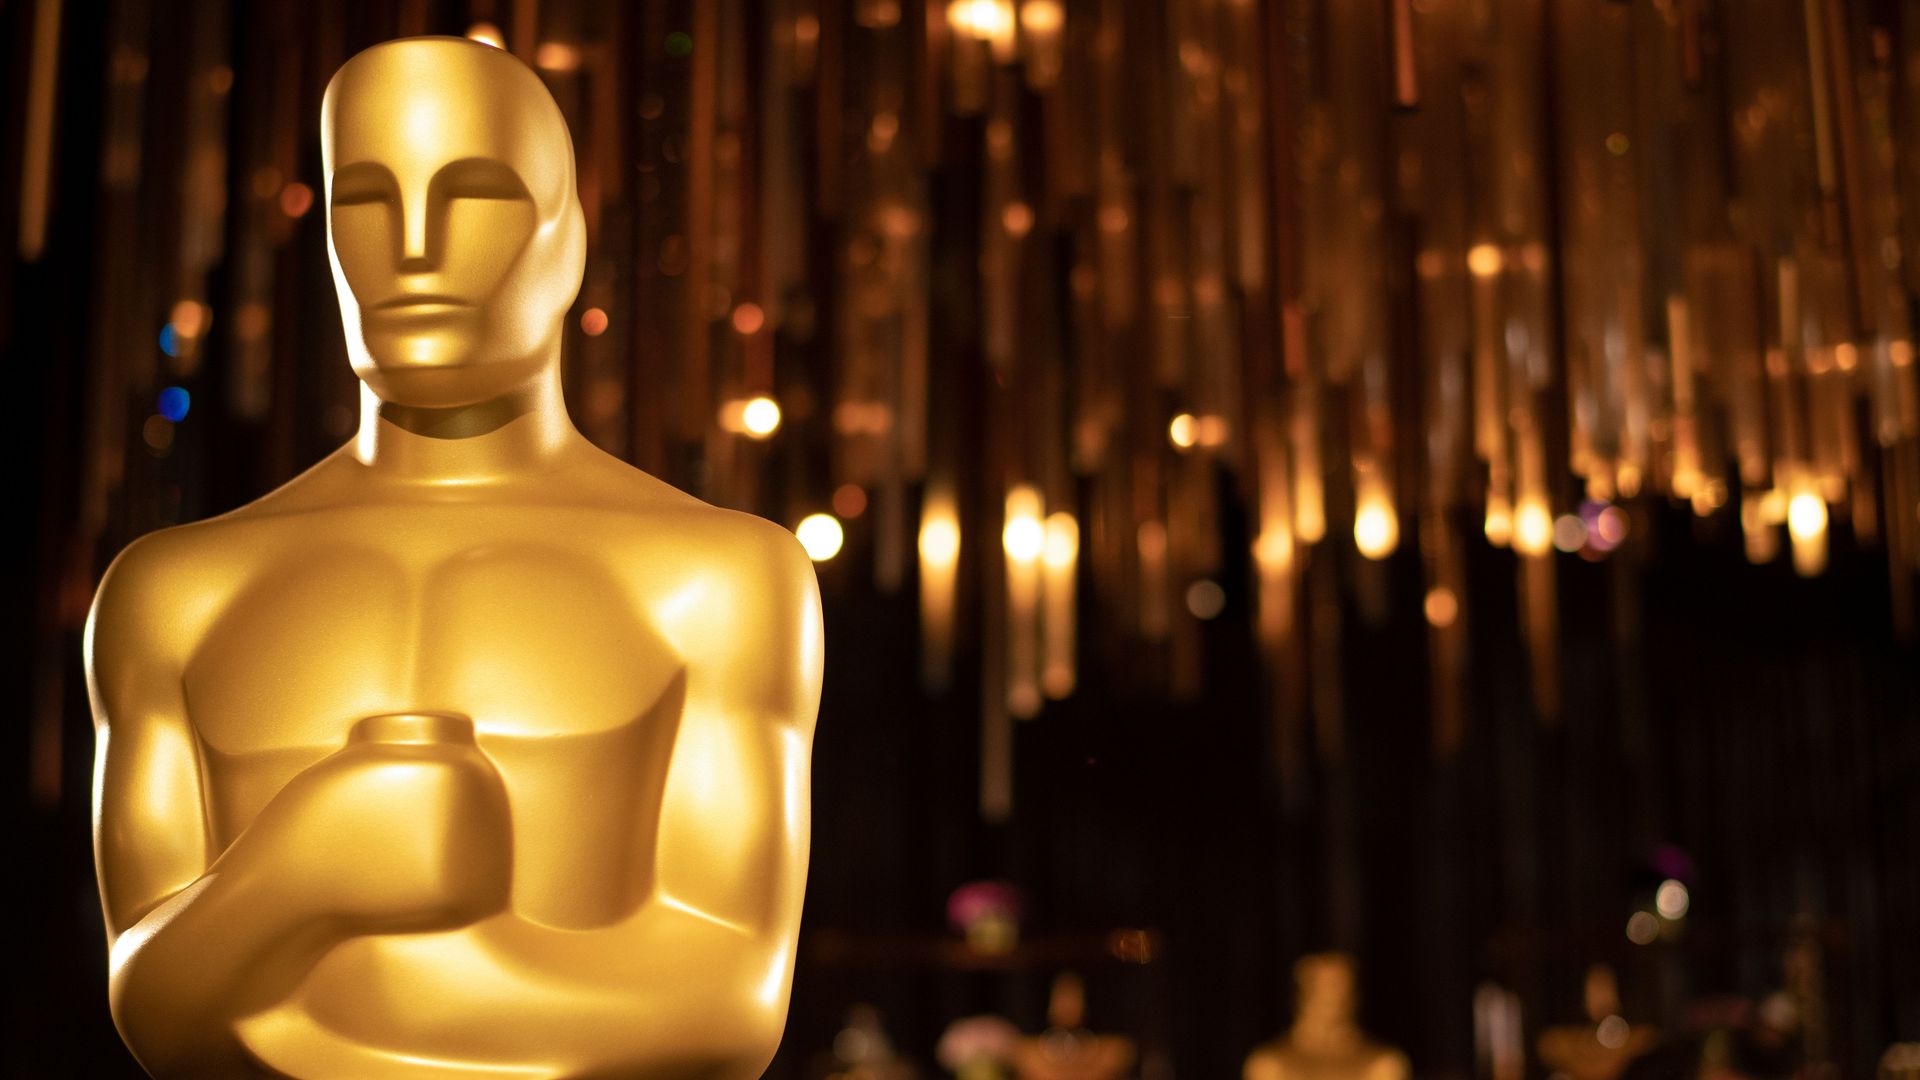 An Oscar Statue is displayed at the 92nd Annual Academy Awards Governors Ball press preview at The Ray Dolby Ballroom at Hollywood & Highland Center, in Hollywood, California, on January 31